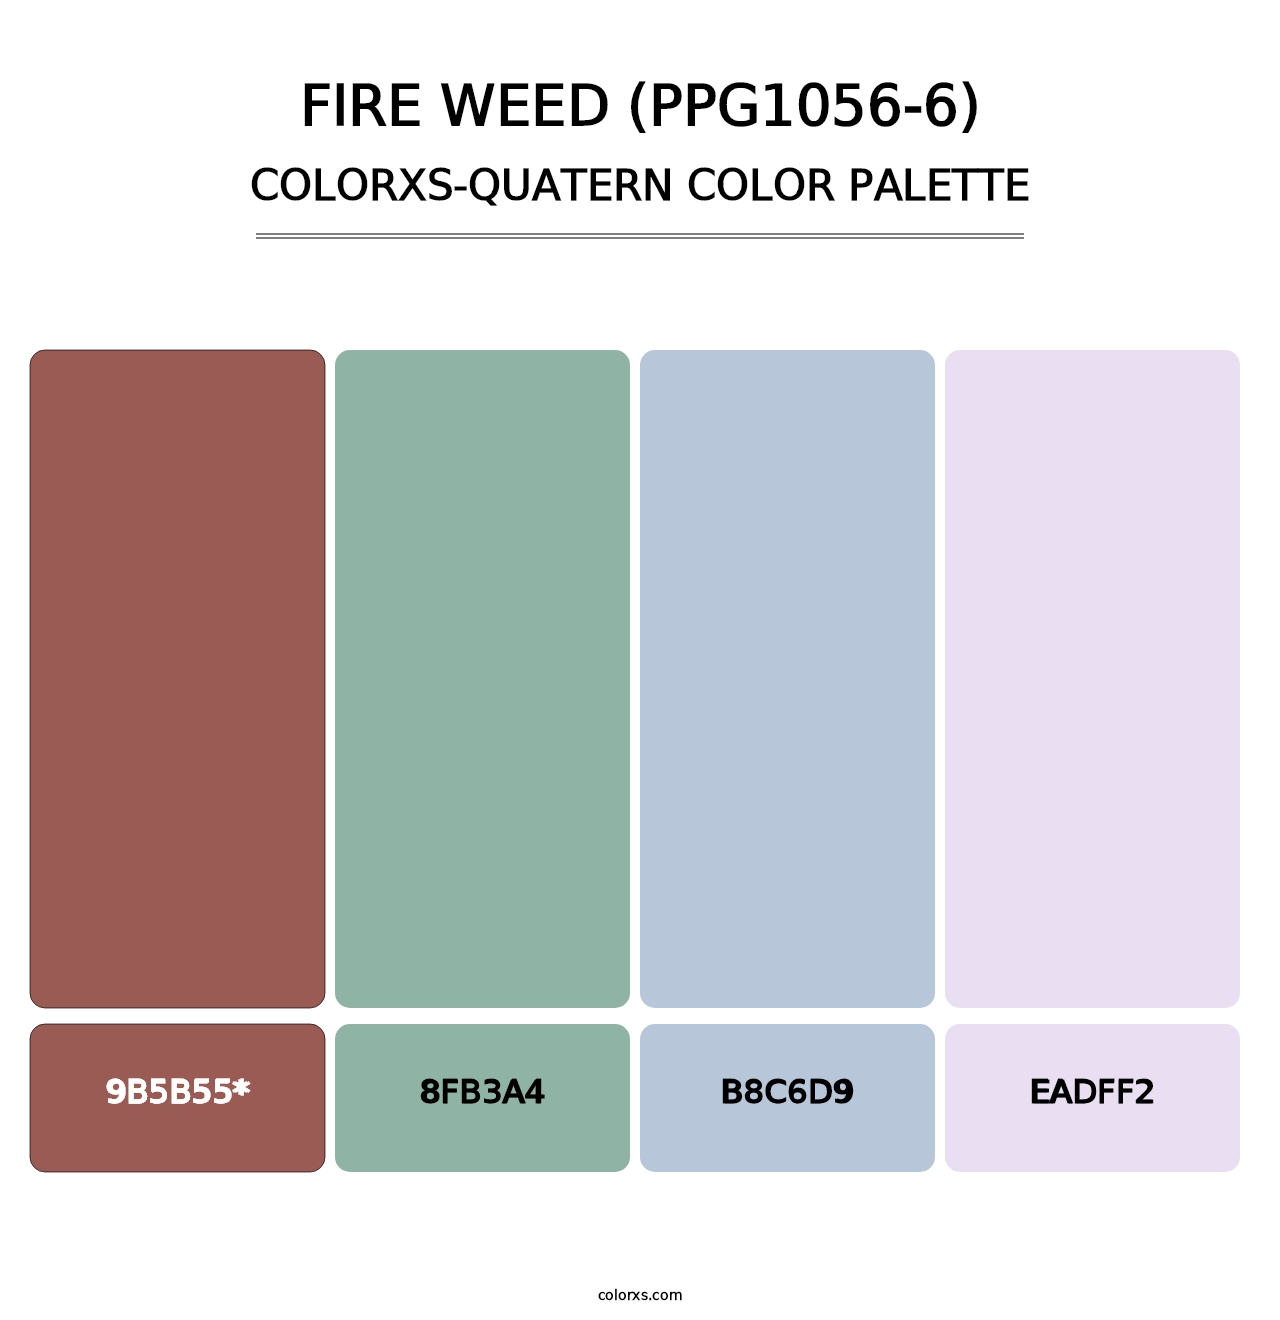 Fire Weed (PPG1056-6) - Colorxs Quatern Palette